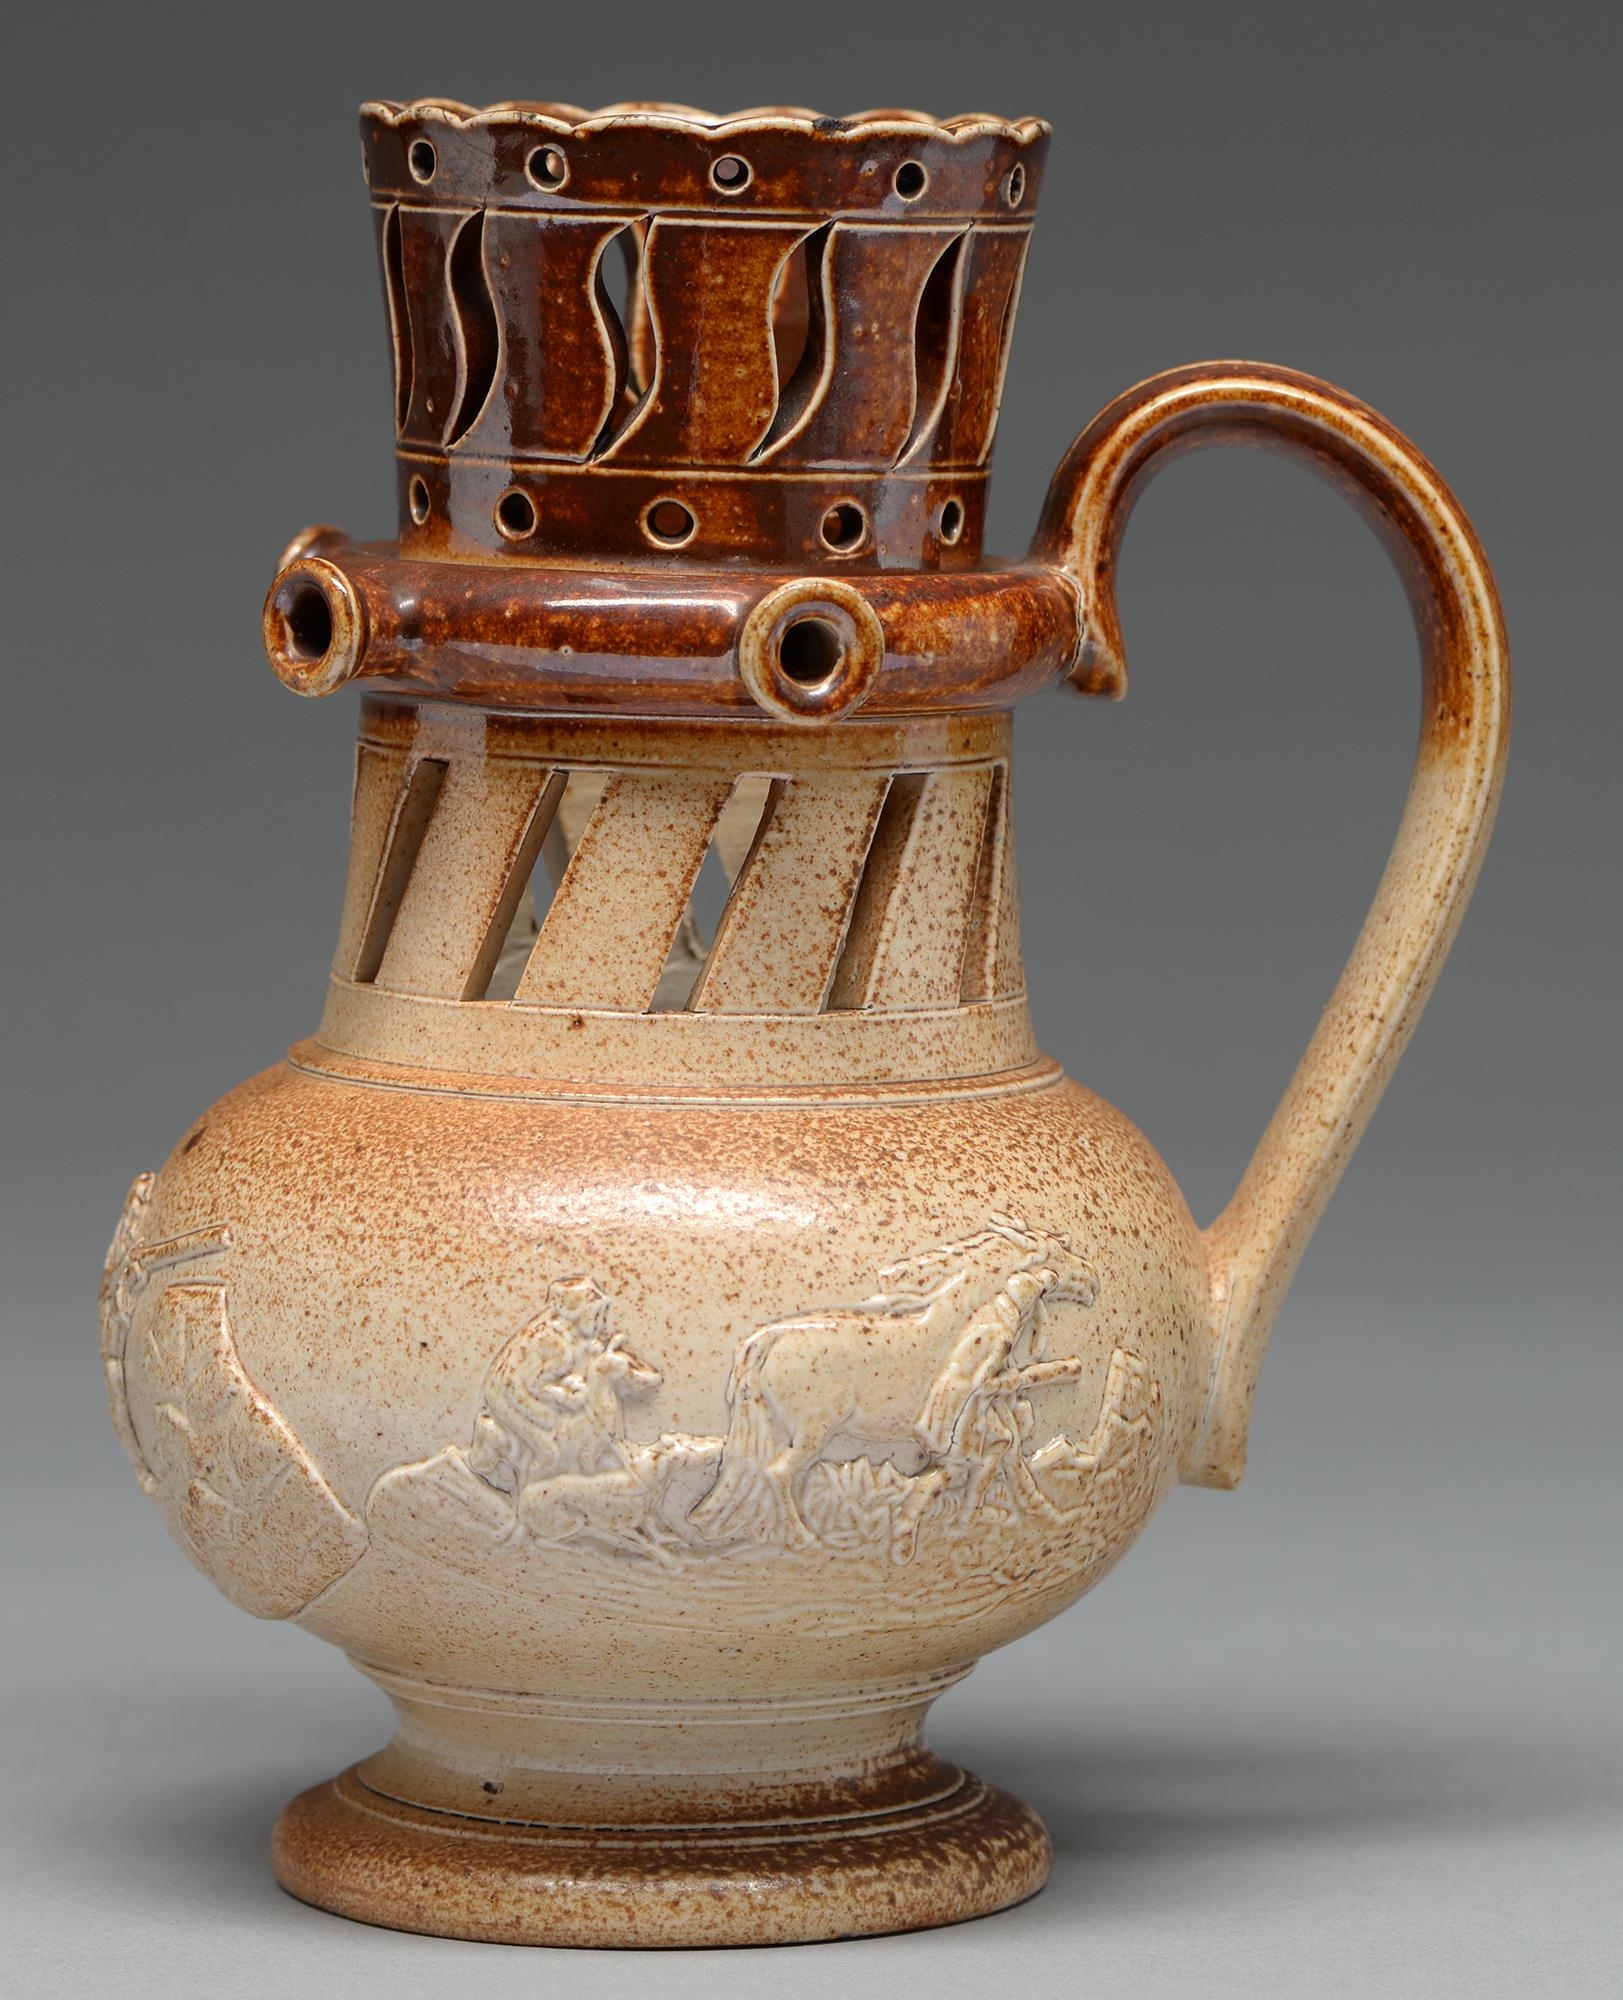 A Derbyshire saltglazed brown stoneware puzzle jug, probably Chesterfield, c1830, with three